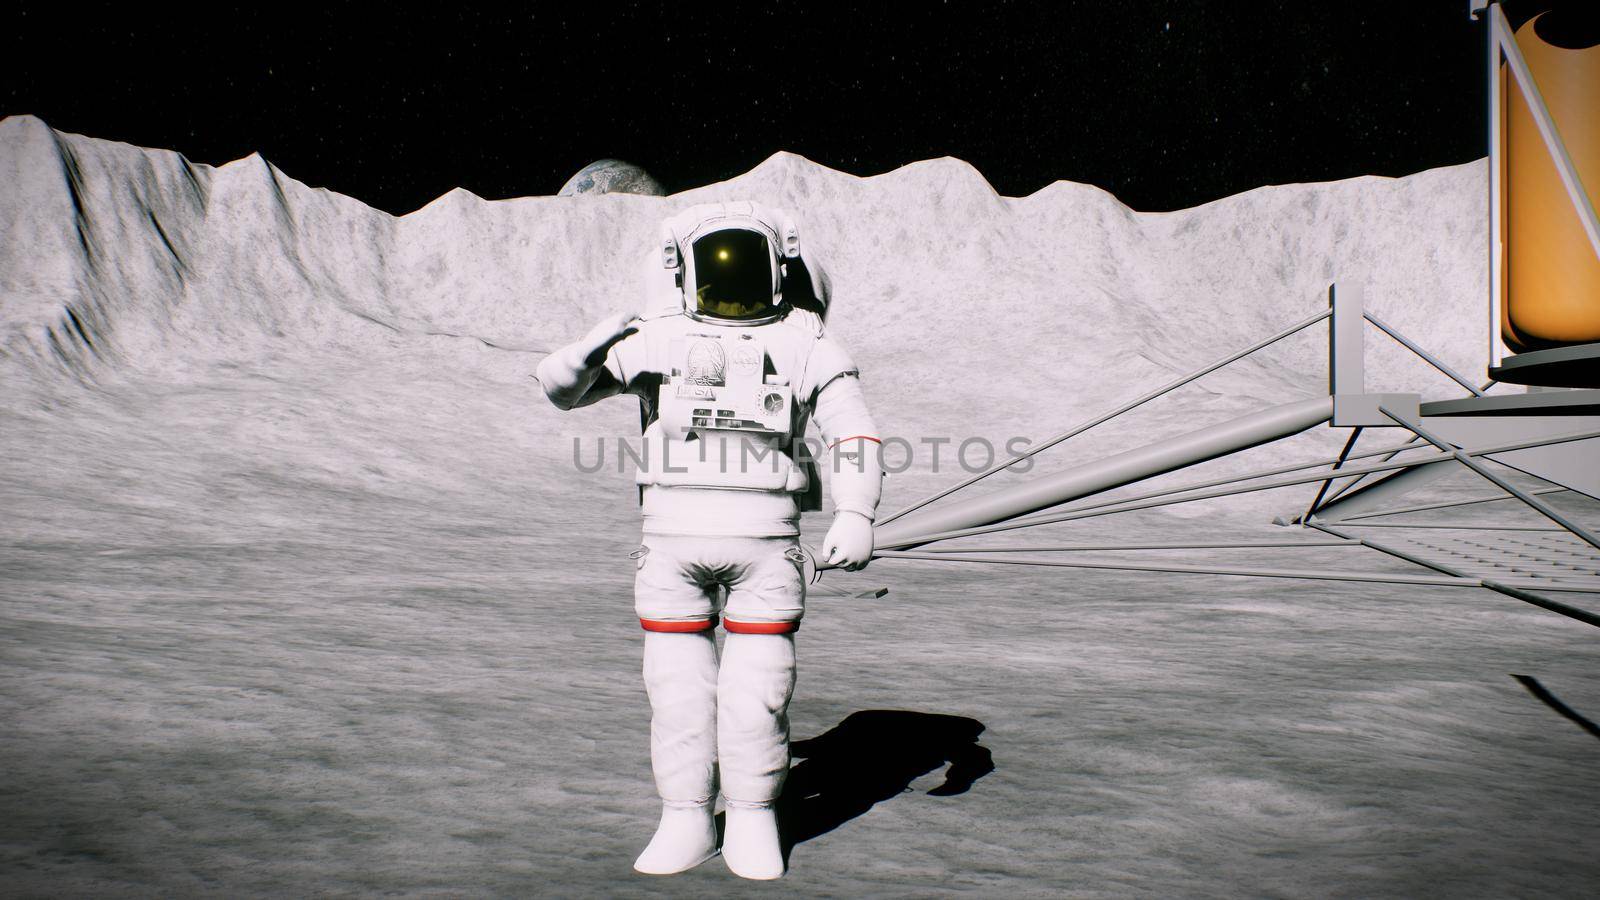 Astronaut on the moon in the crater near the lander salutes.